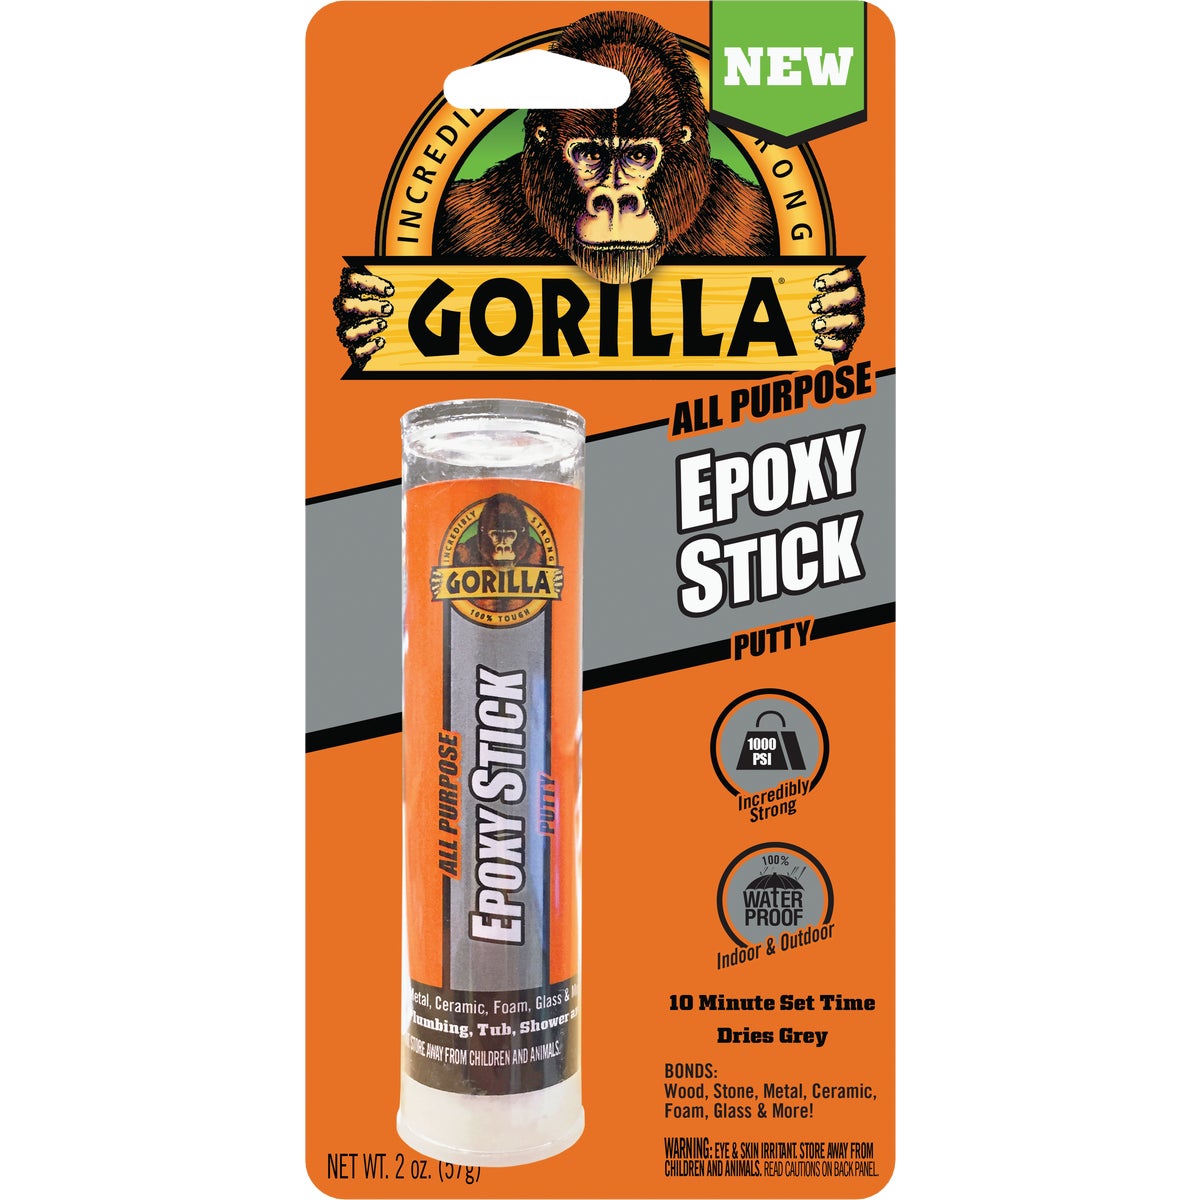 Item 373852, Gorilla All-Purpose Epoxy Stick is an incredibly strong and versatile epoxy